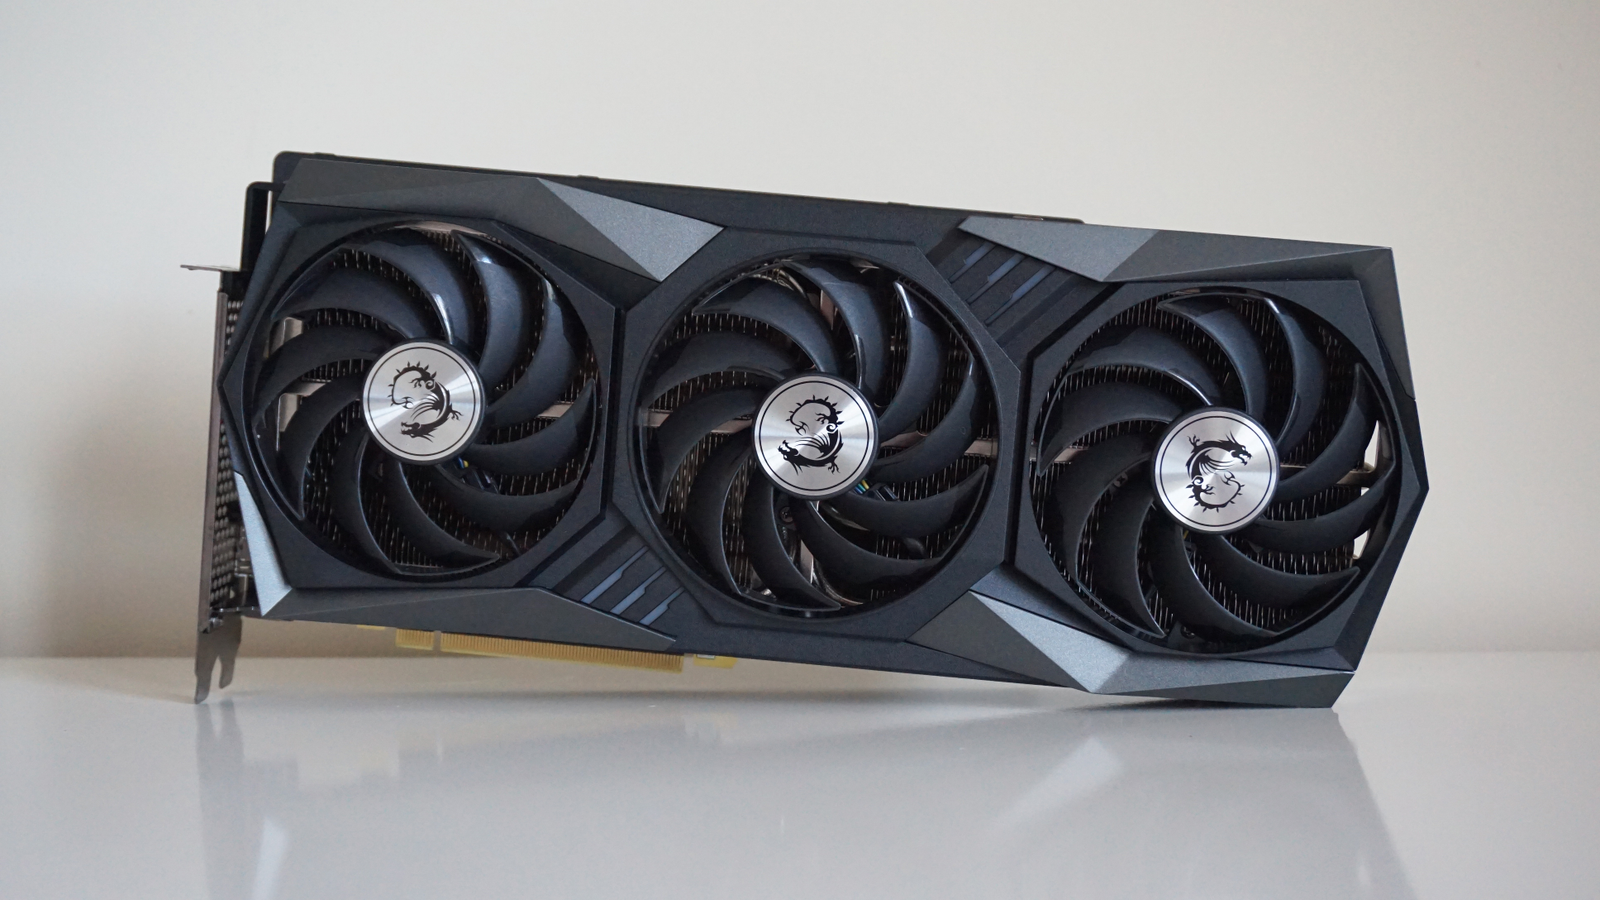 MSI GeForce RTX 2080 Ti Gaming X Trio Reviews, Pros and Cons